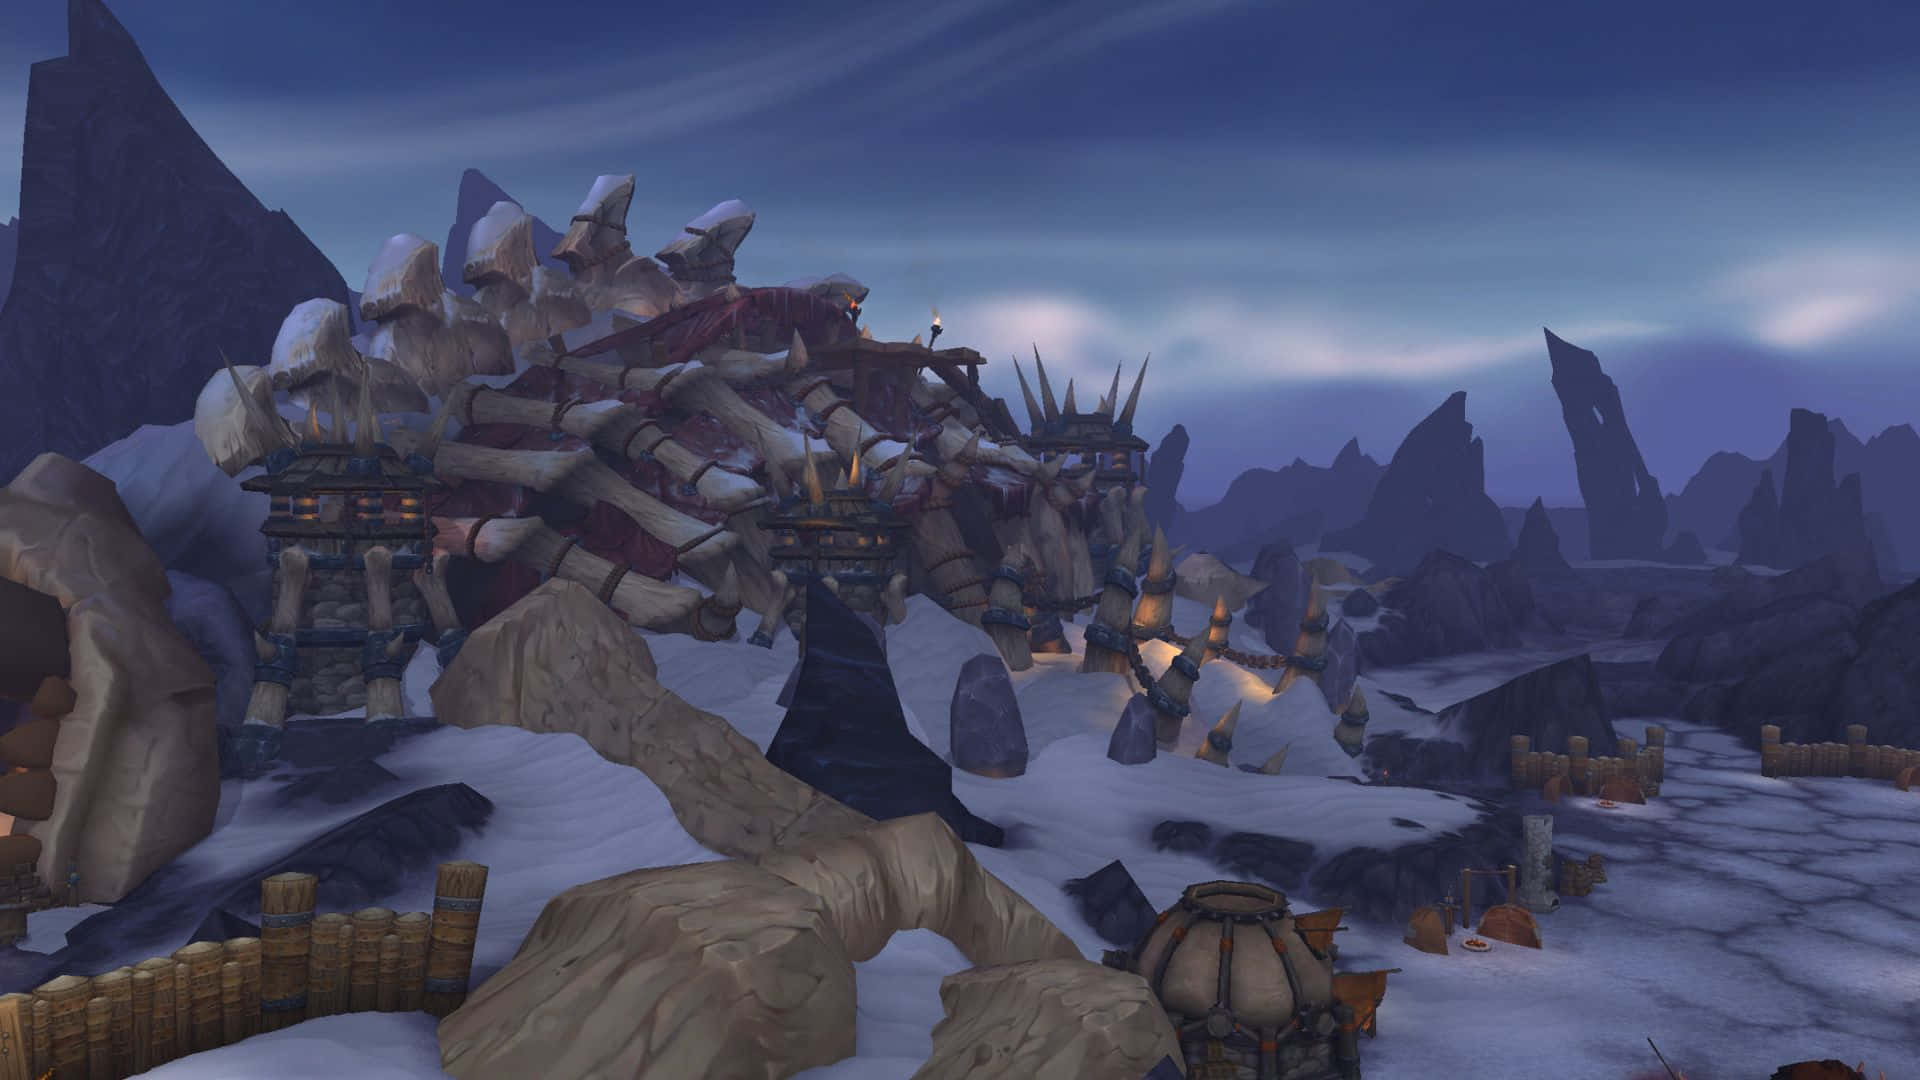 Epic Battle In World Of Warcraft: Warlords Of Draenor Wallpaper